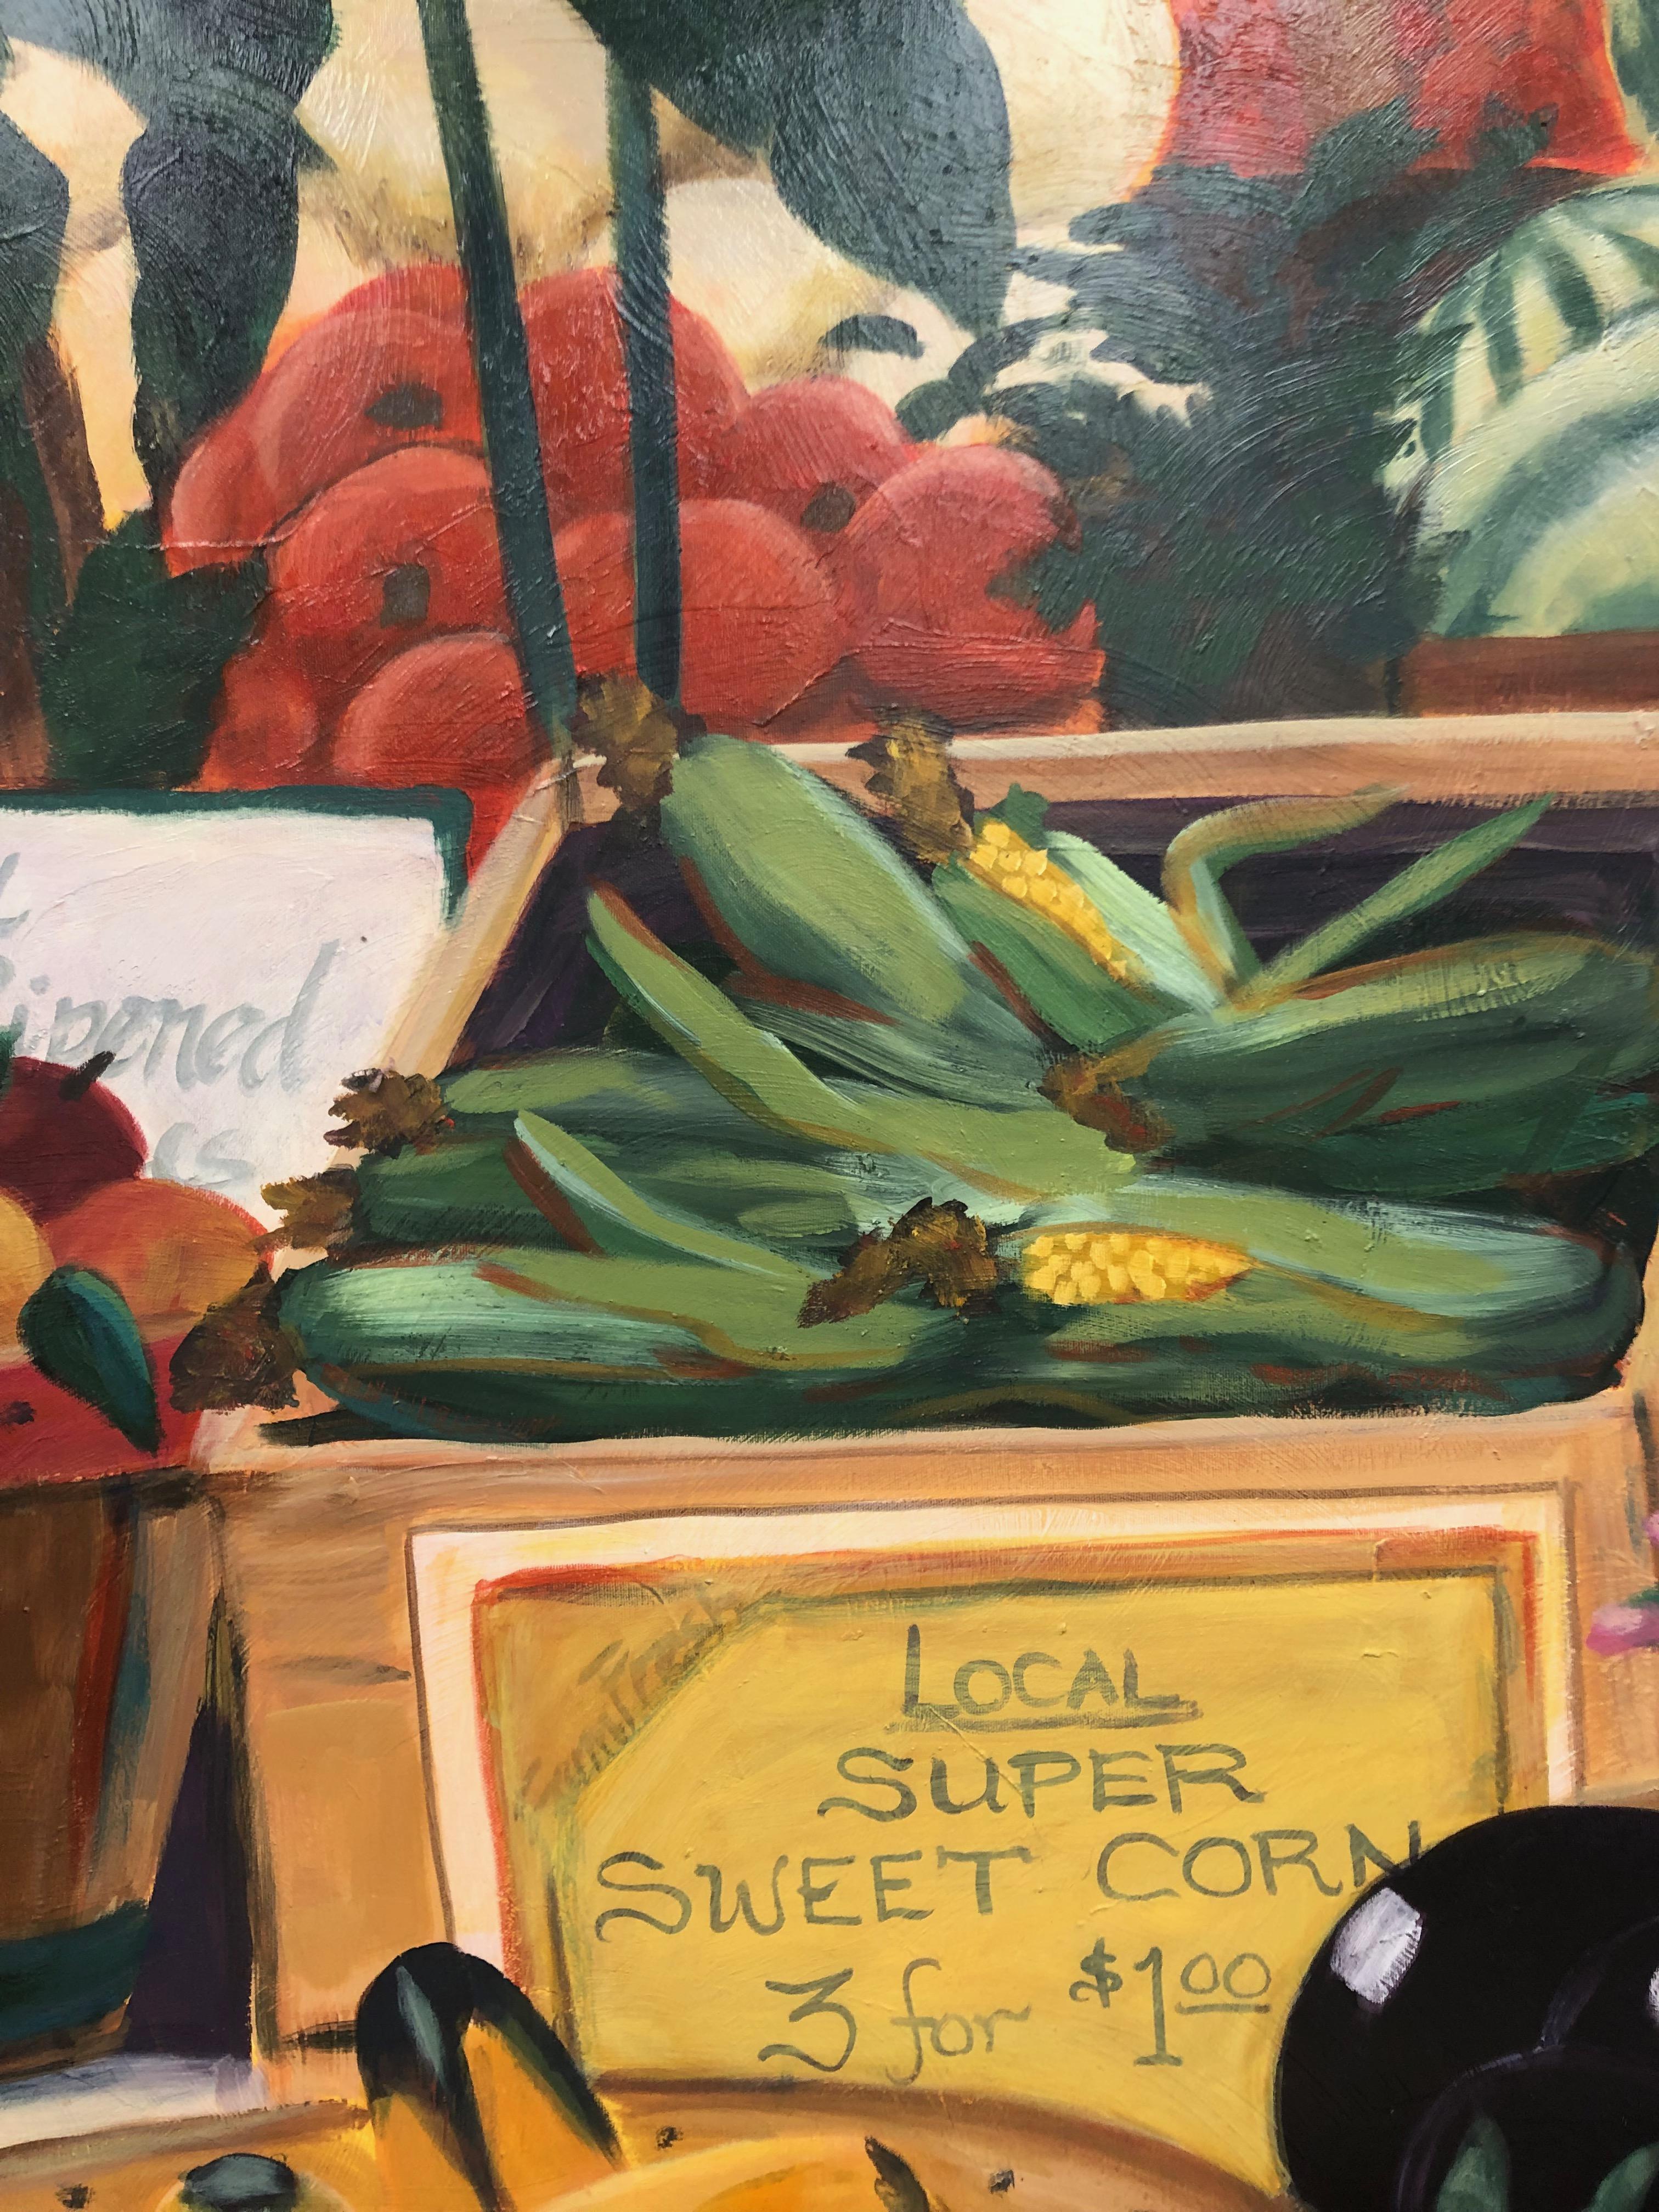 Fruit Market Large Still Life Painting
Artist signed lower right.
Carol Korpi McKinley is an internationally acclaimed American artist best known for her large-scale depictions of fruits, vegetables and animals, as well as her lush, color-drenched